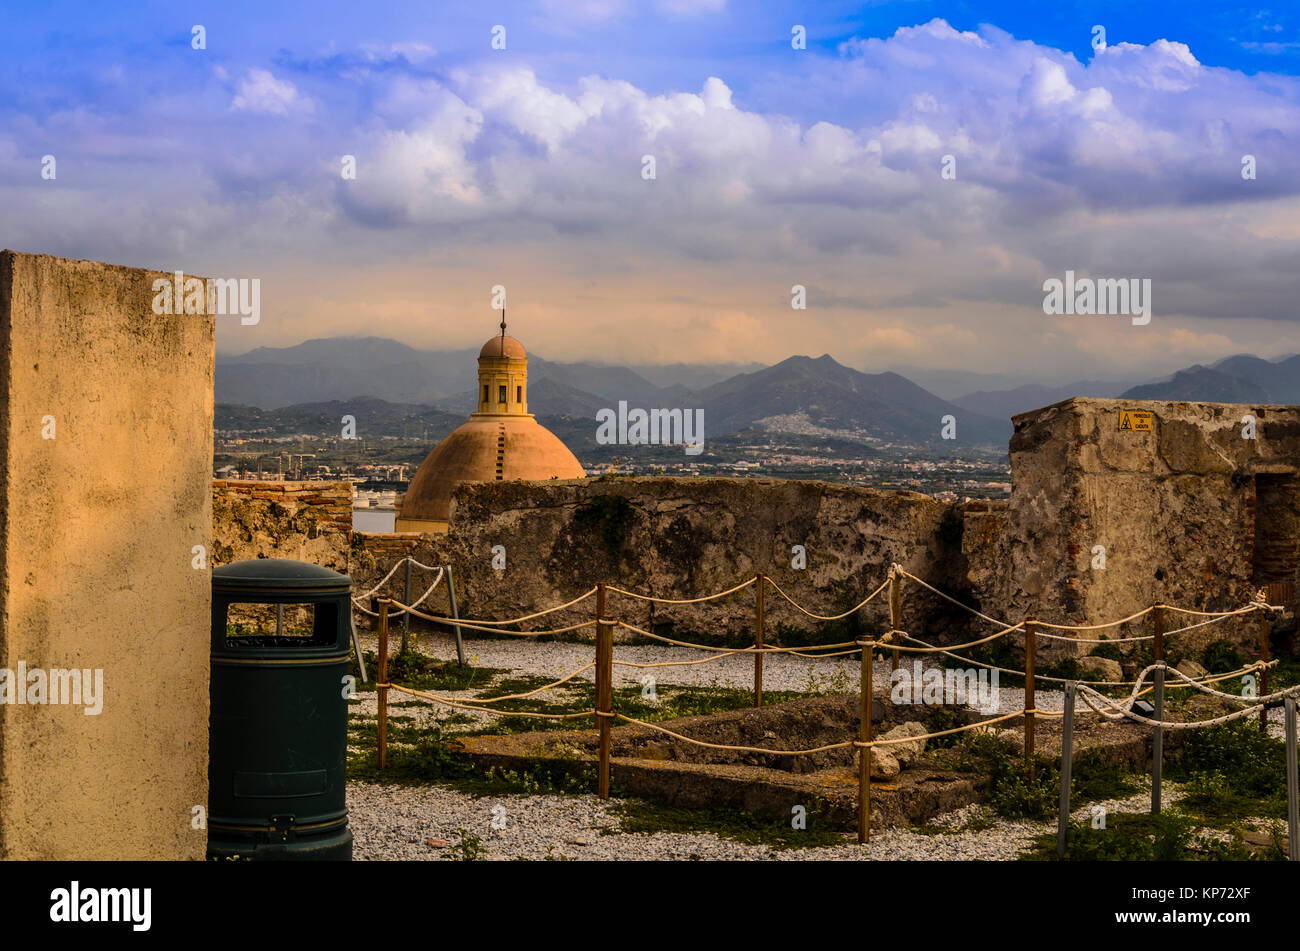 Mountainous landscape of sicily with church dome from the defenses of the norman castle of milazzo Stock Photo